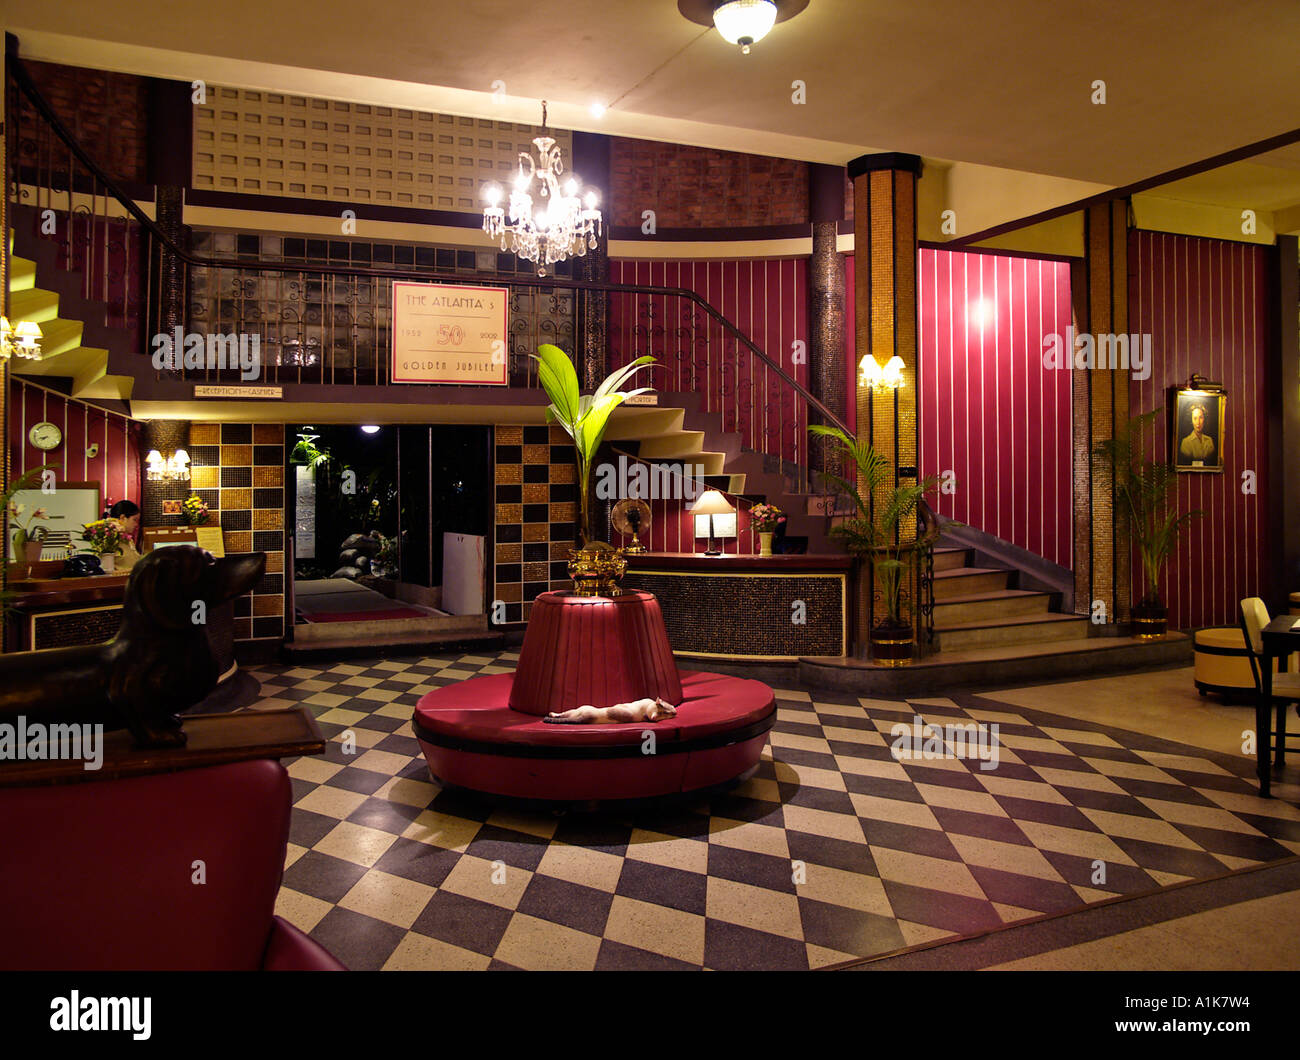 The Atalanta Hotel Lobby is the oldest unaltered 1950's theatrical style lobby in Bankgkok Thailand Stock Photo